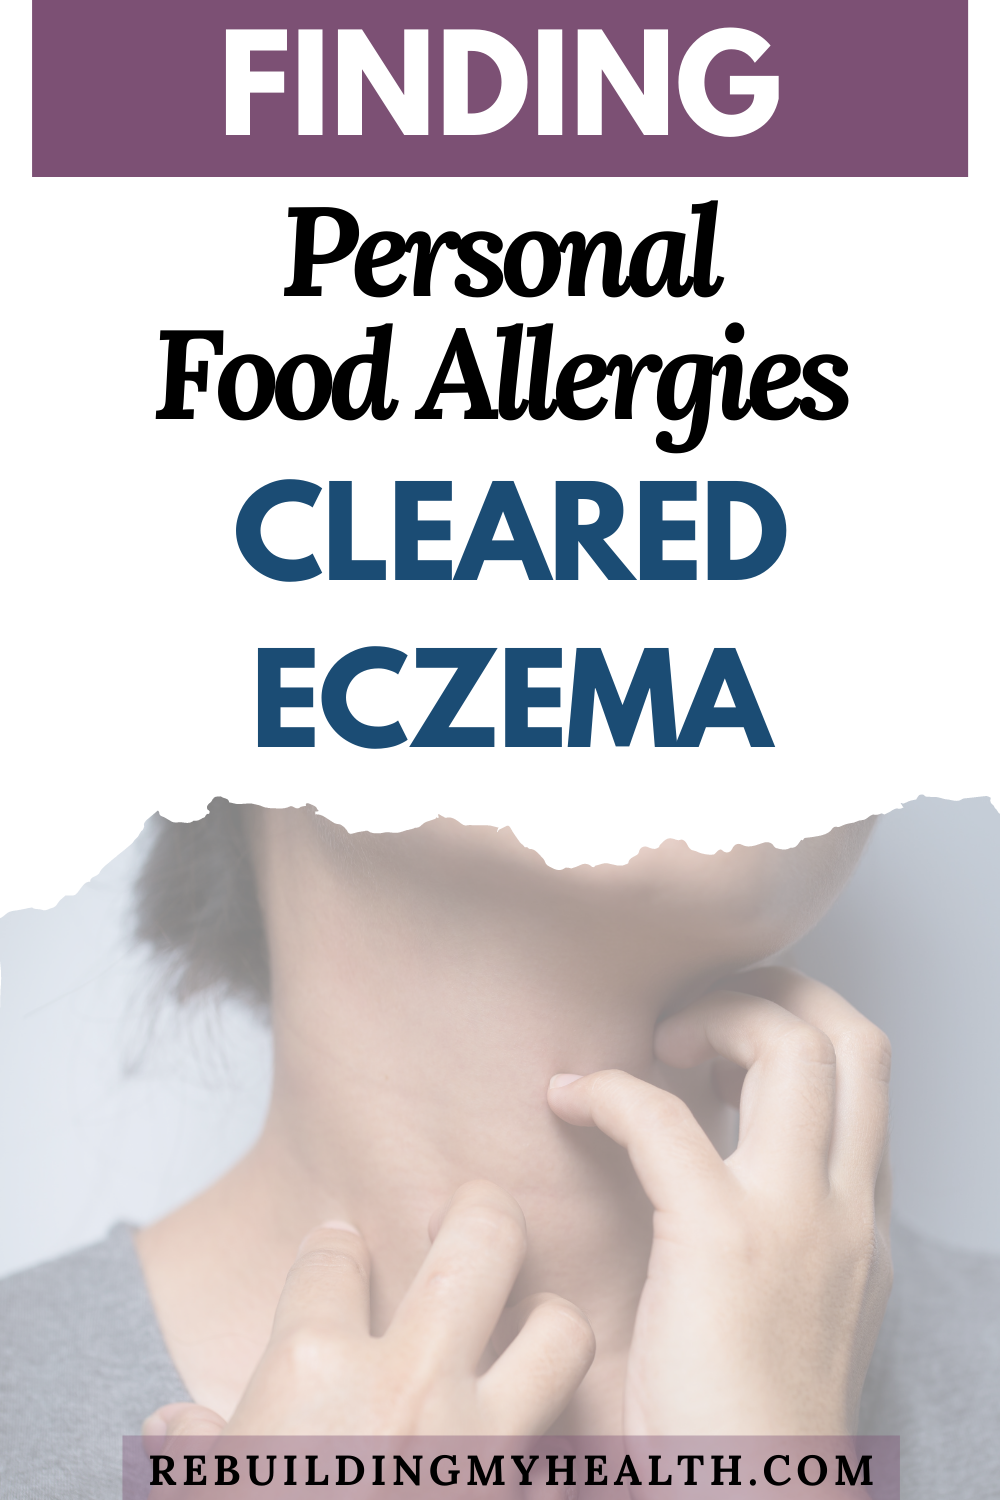 Learn about eczema and food allergies. After intense exercise, a paleo diet and supplements contributed to severe eczema, Nattha cleared it with an elimination diet and by reducing her stress.